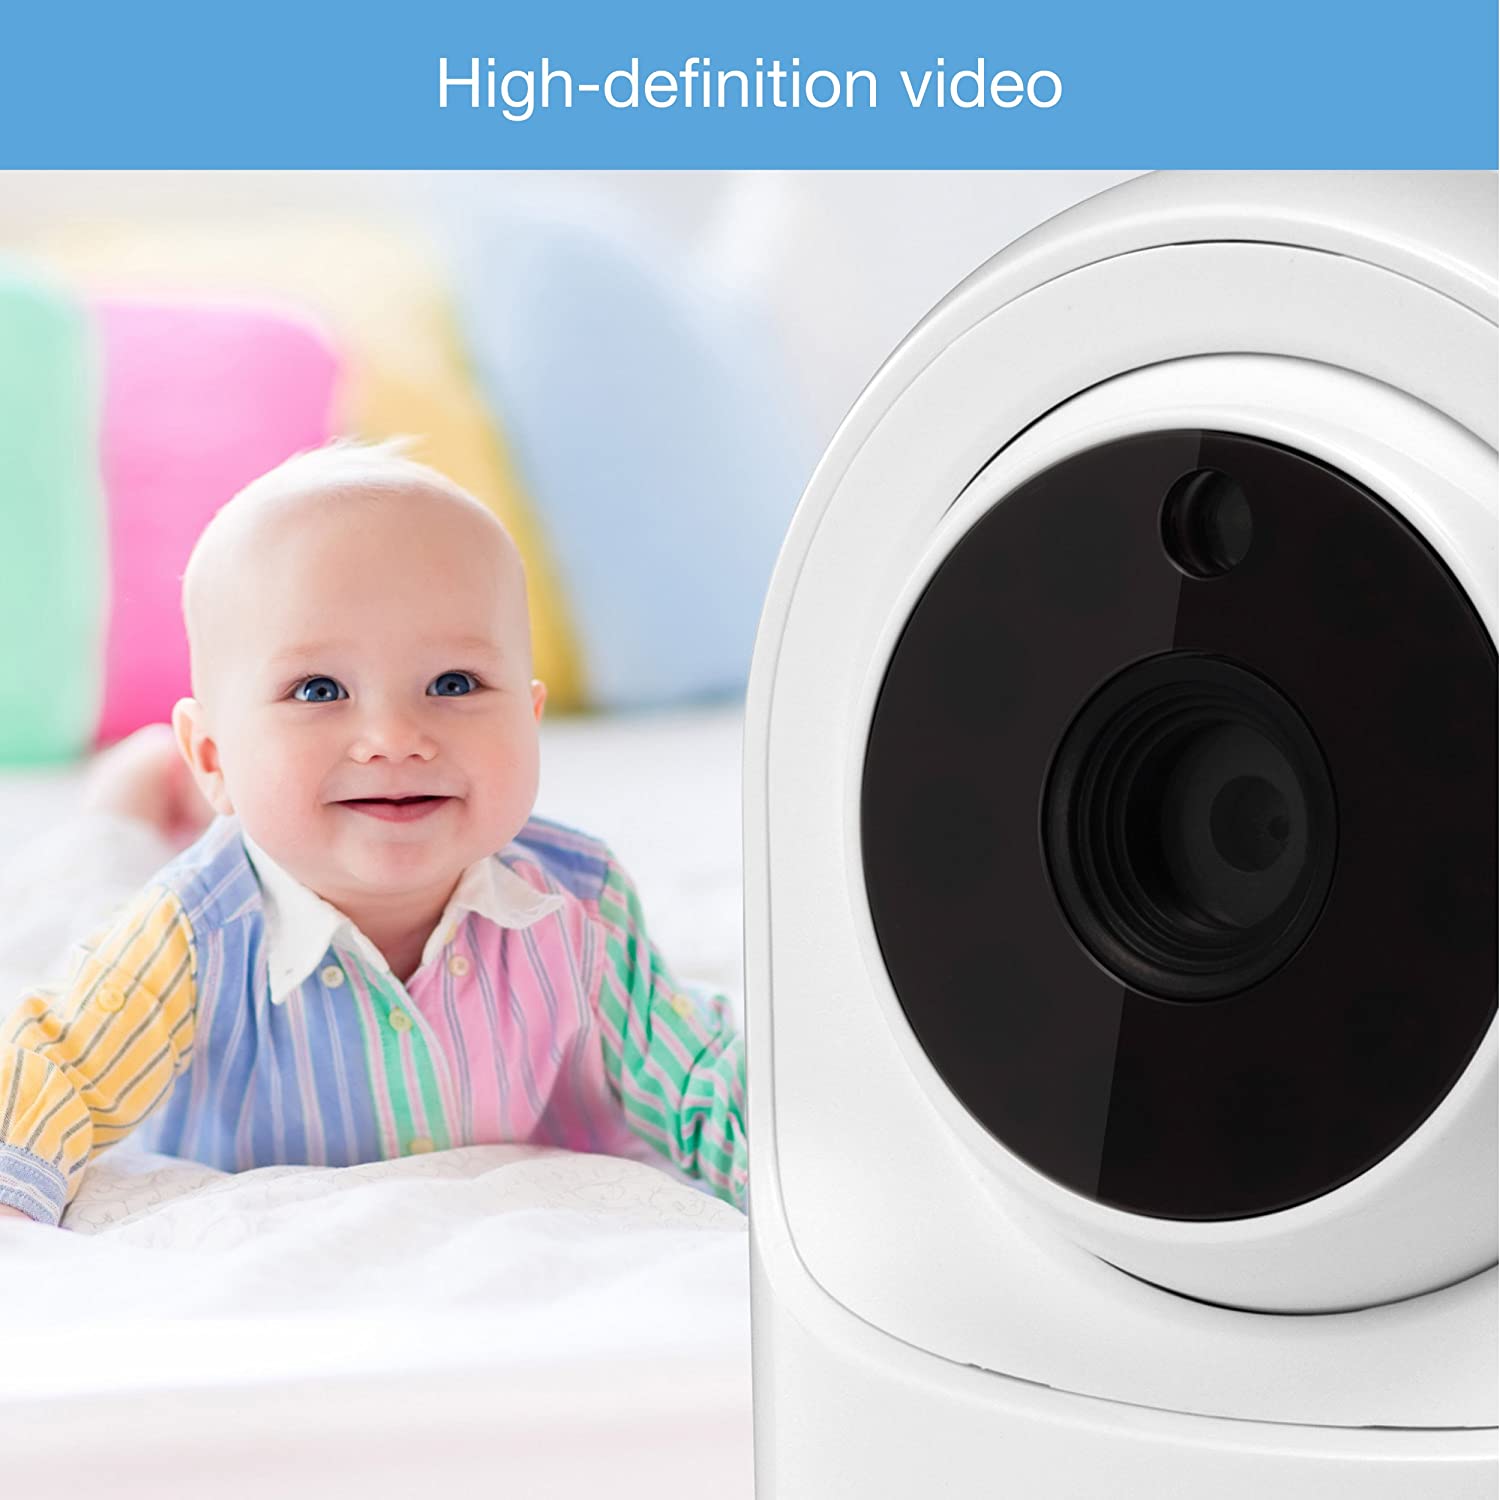 VTech VM981 Wireless WiFi Video Baby Monitor with Remote Access App, 5" Touch Screen, White